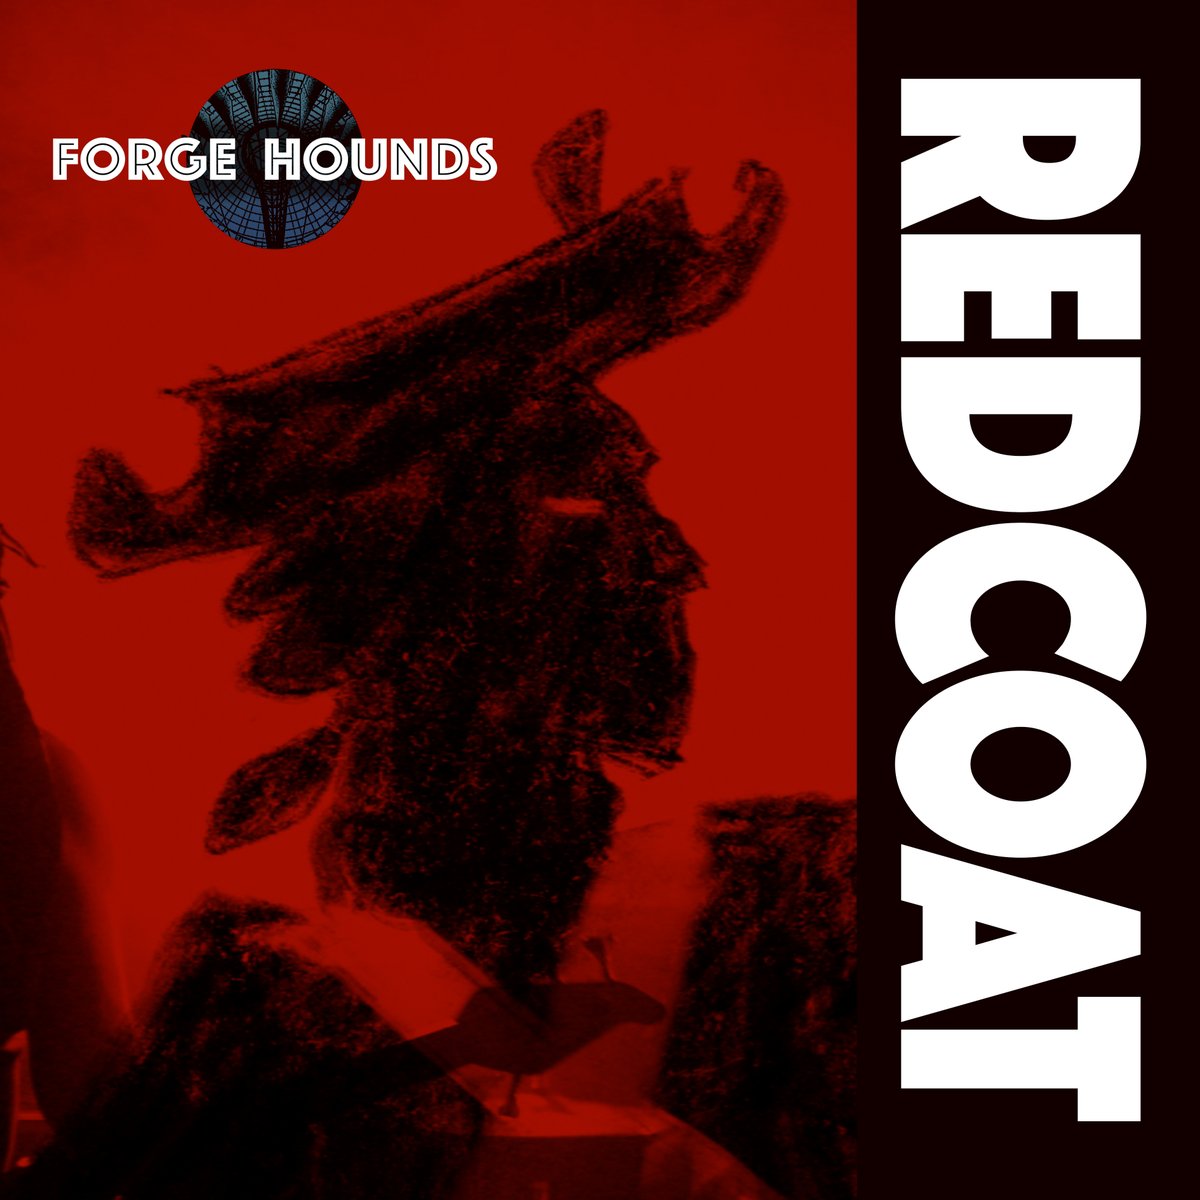 Want some Irish rock 'n'roll that will knock your socks off! Come listen to @ForgeHounds 'Redcoat' on the new Unknown Sounds. Check it our here: pxl.to/NewestUnknownS…
#UnknownSounds #PeteSaxer #independentmusic #independentartist